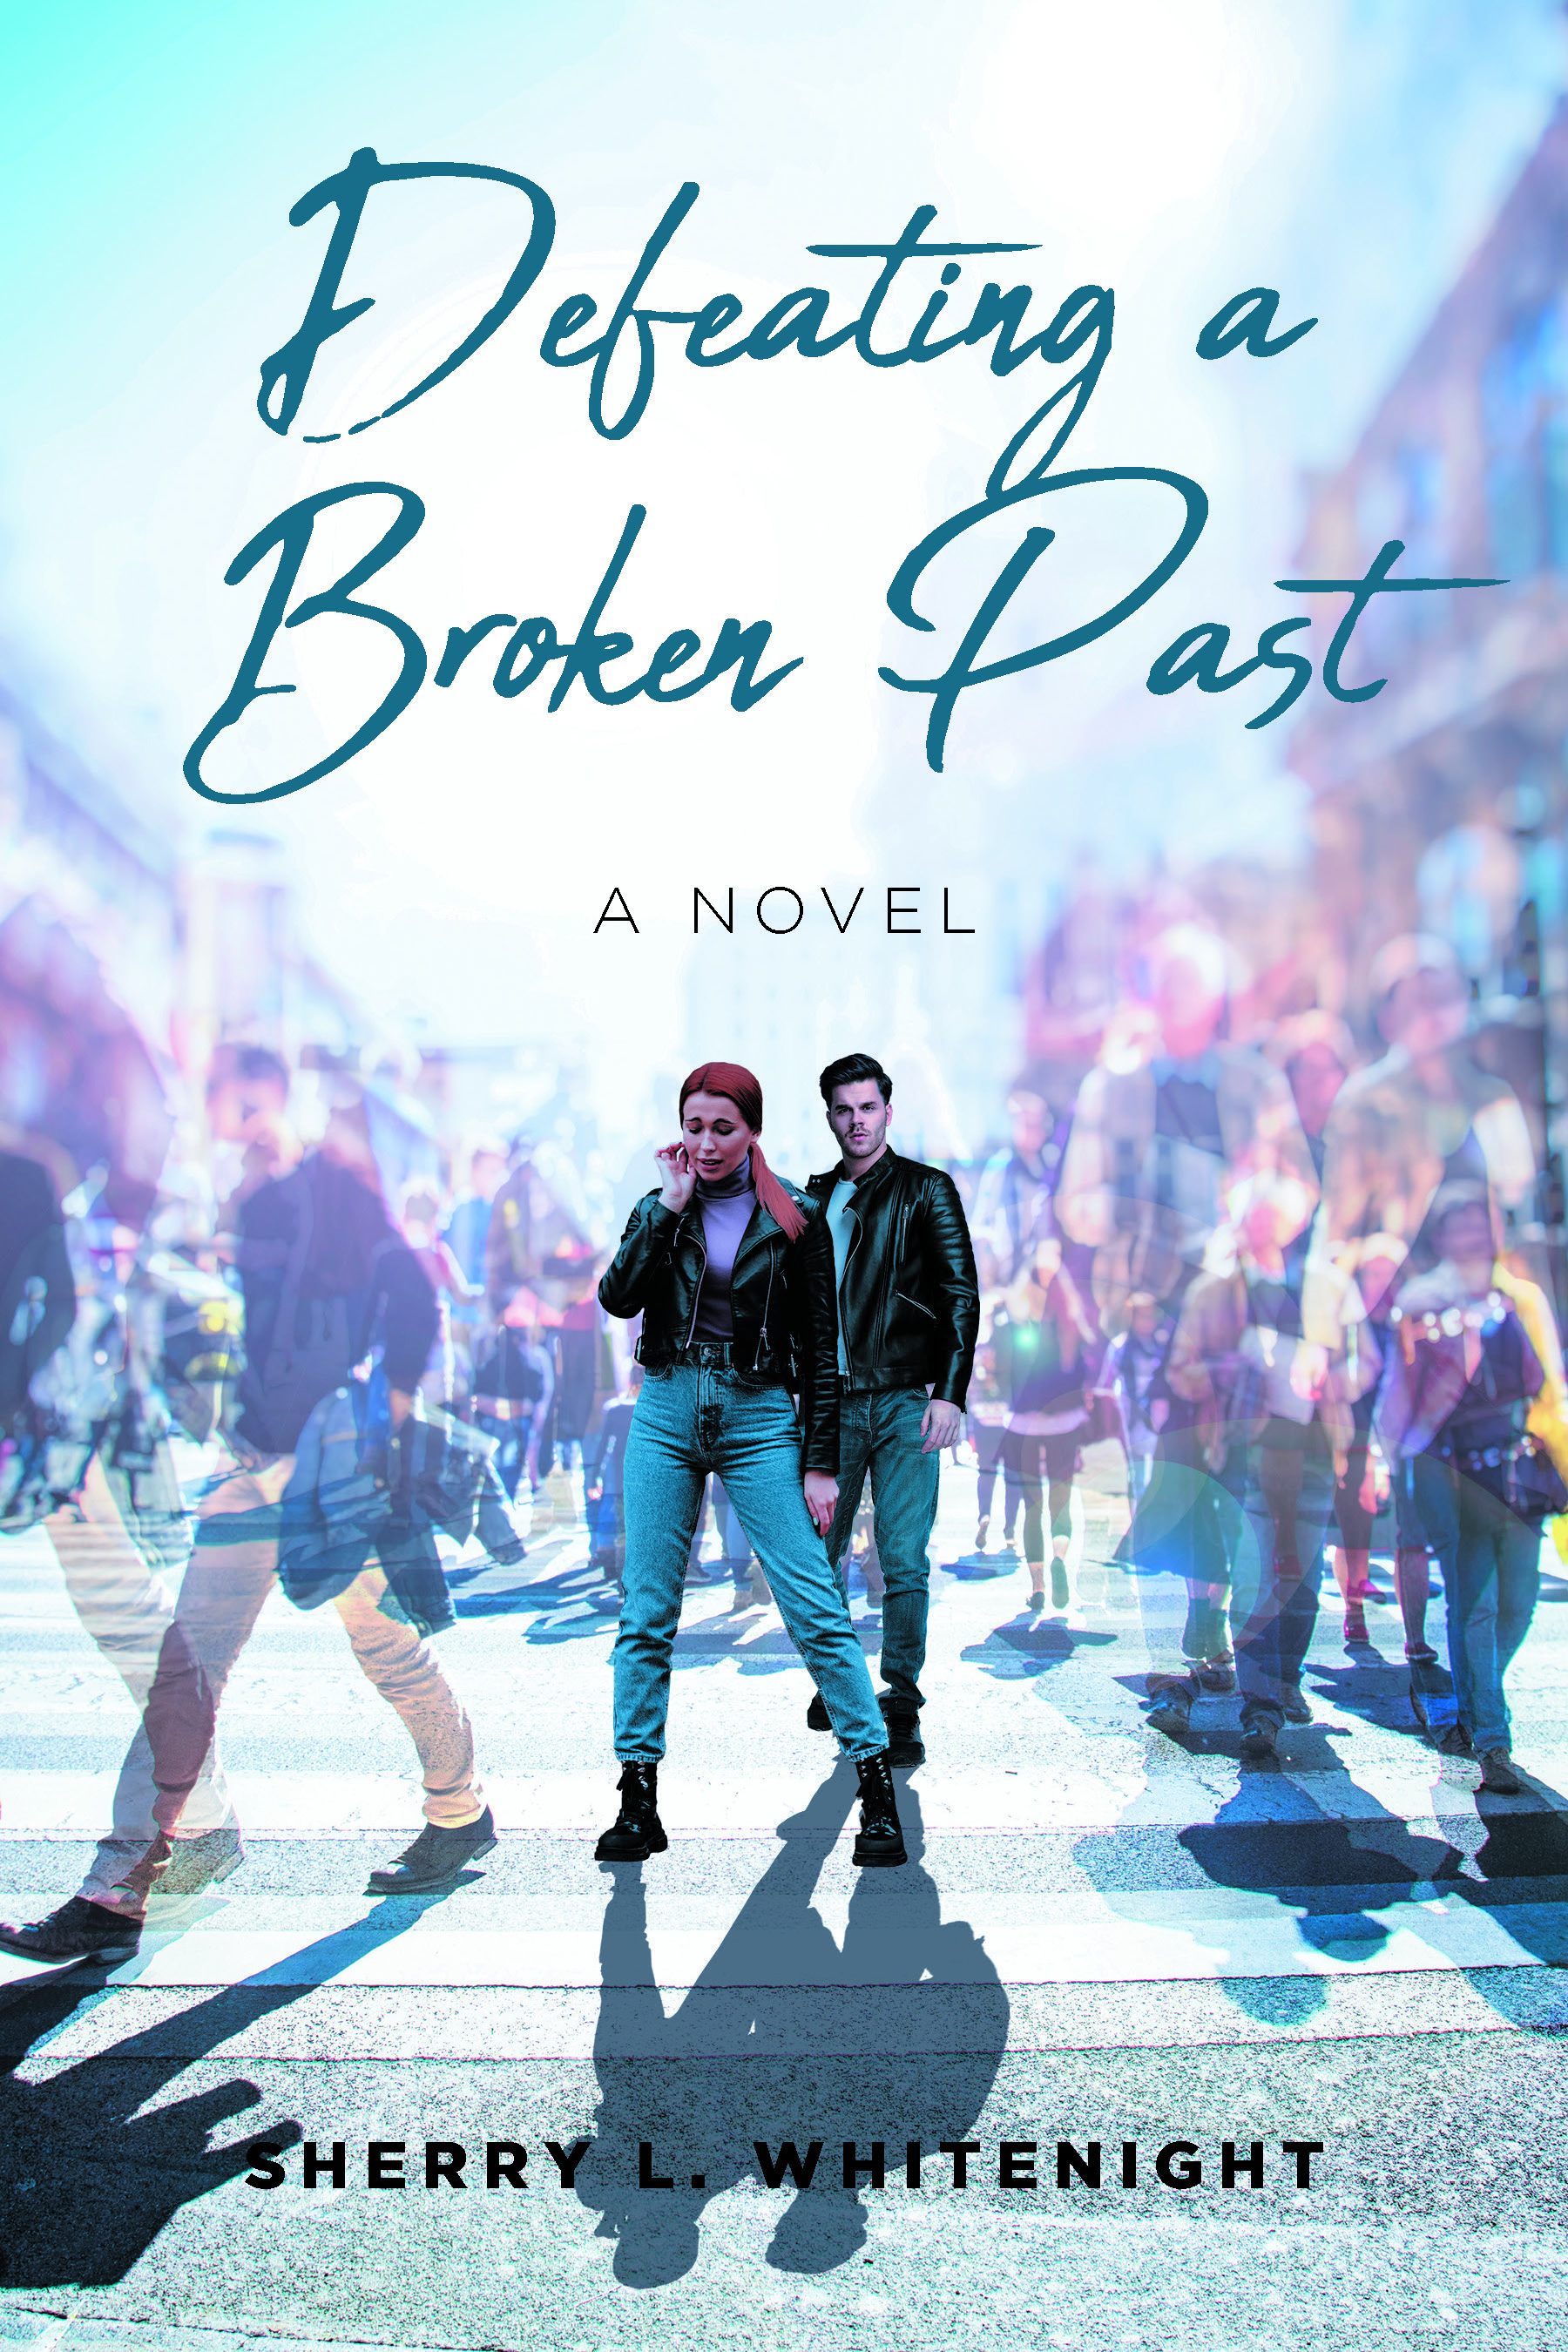 Sherry L. Whitenight’s New Book, “Defeating a Broken Past: A Novel,” Follows One Woman’s Journey to Heal from Her Past Abuse While Moving Forward with Her Life